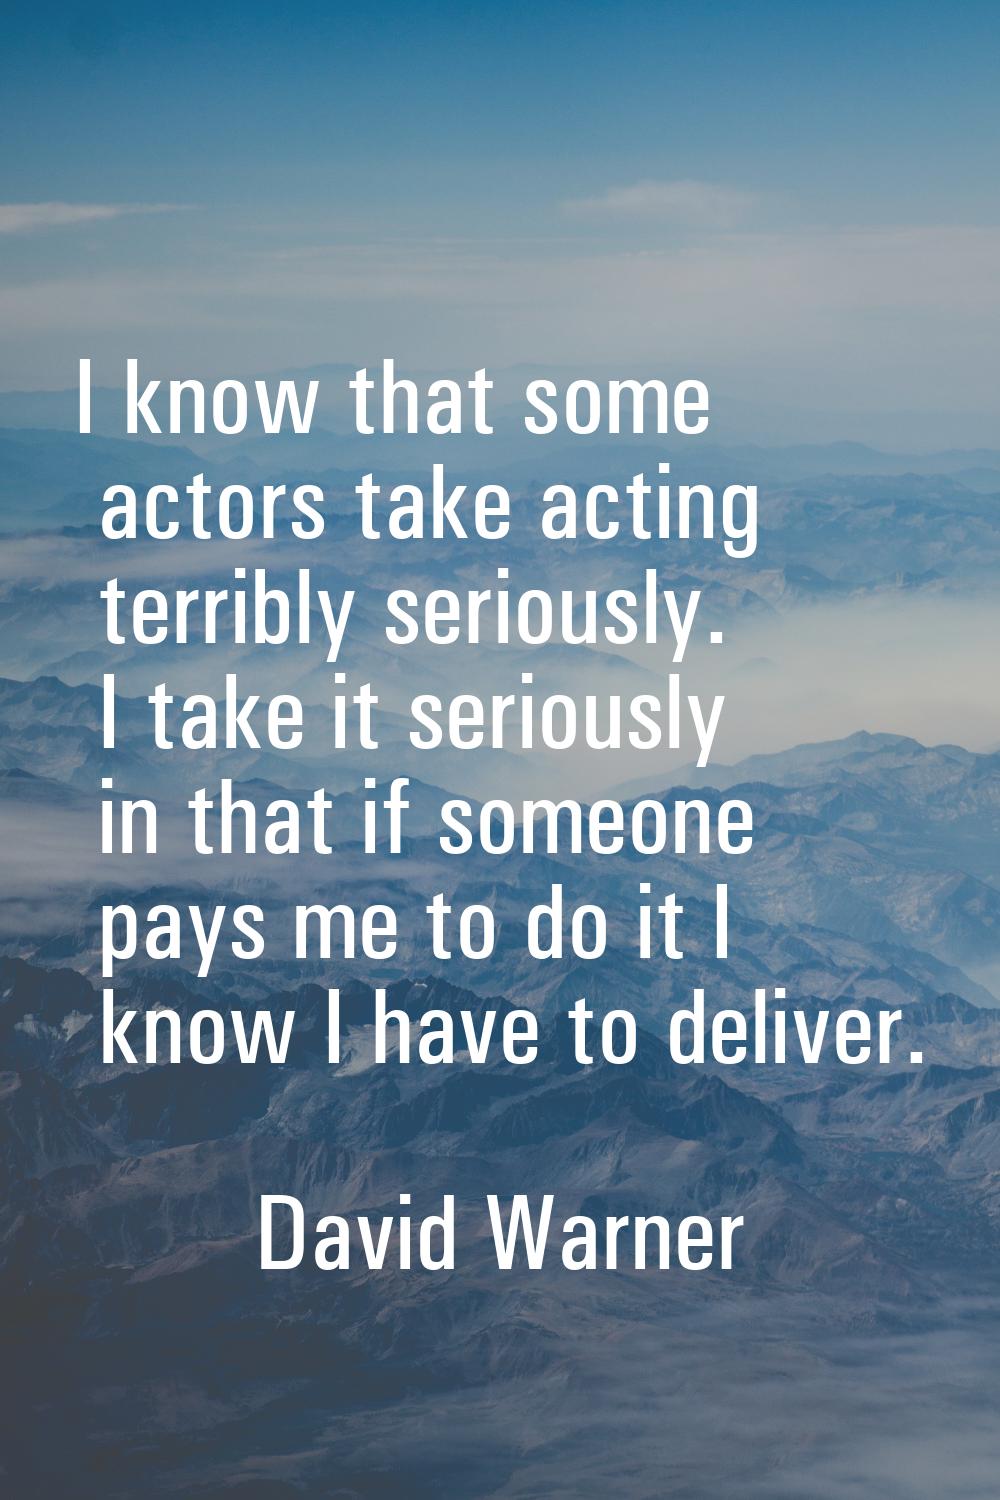 I know that some actors take acting terribly seriously. I take it seriously in that if someone pays